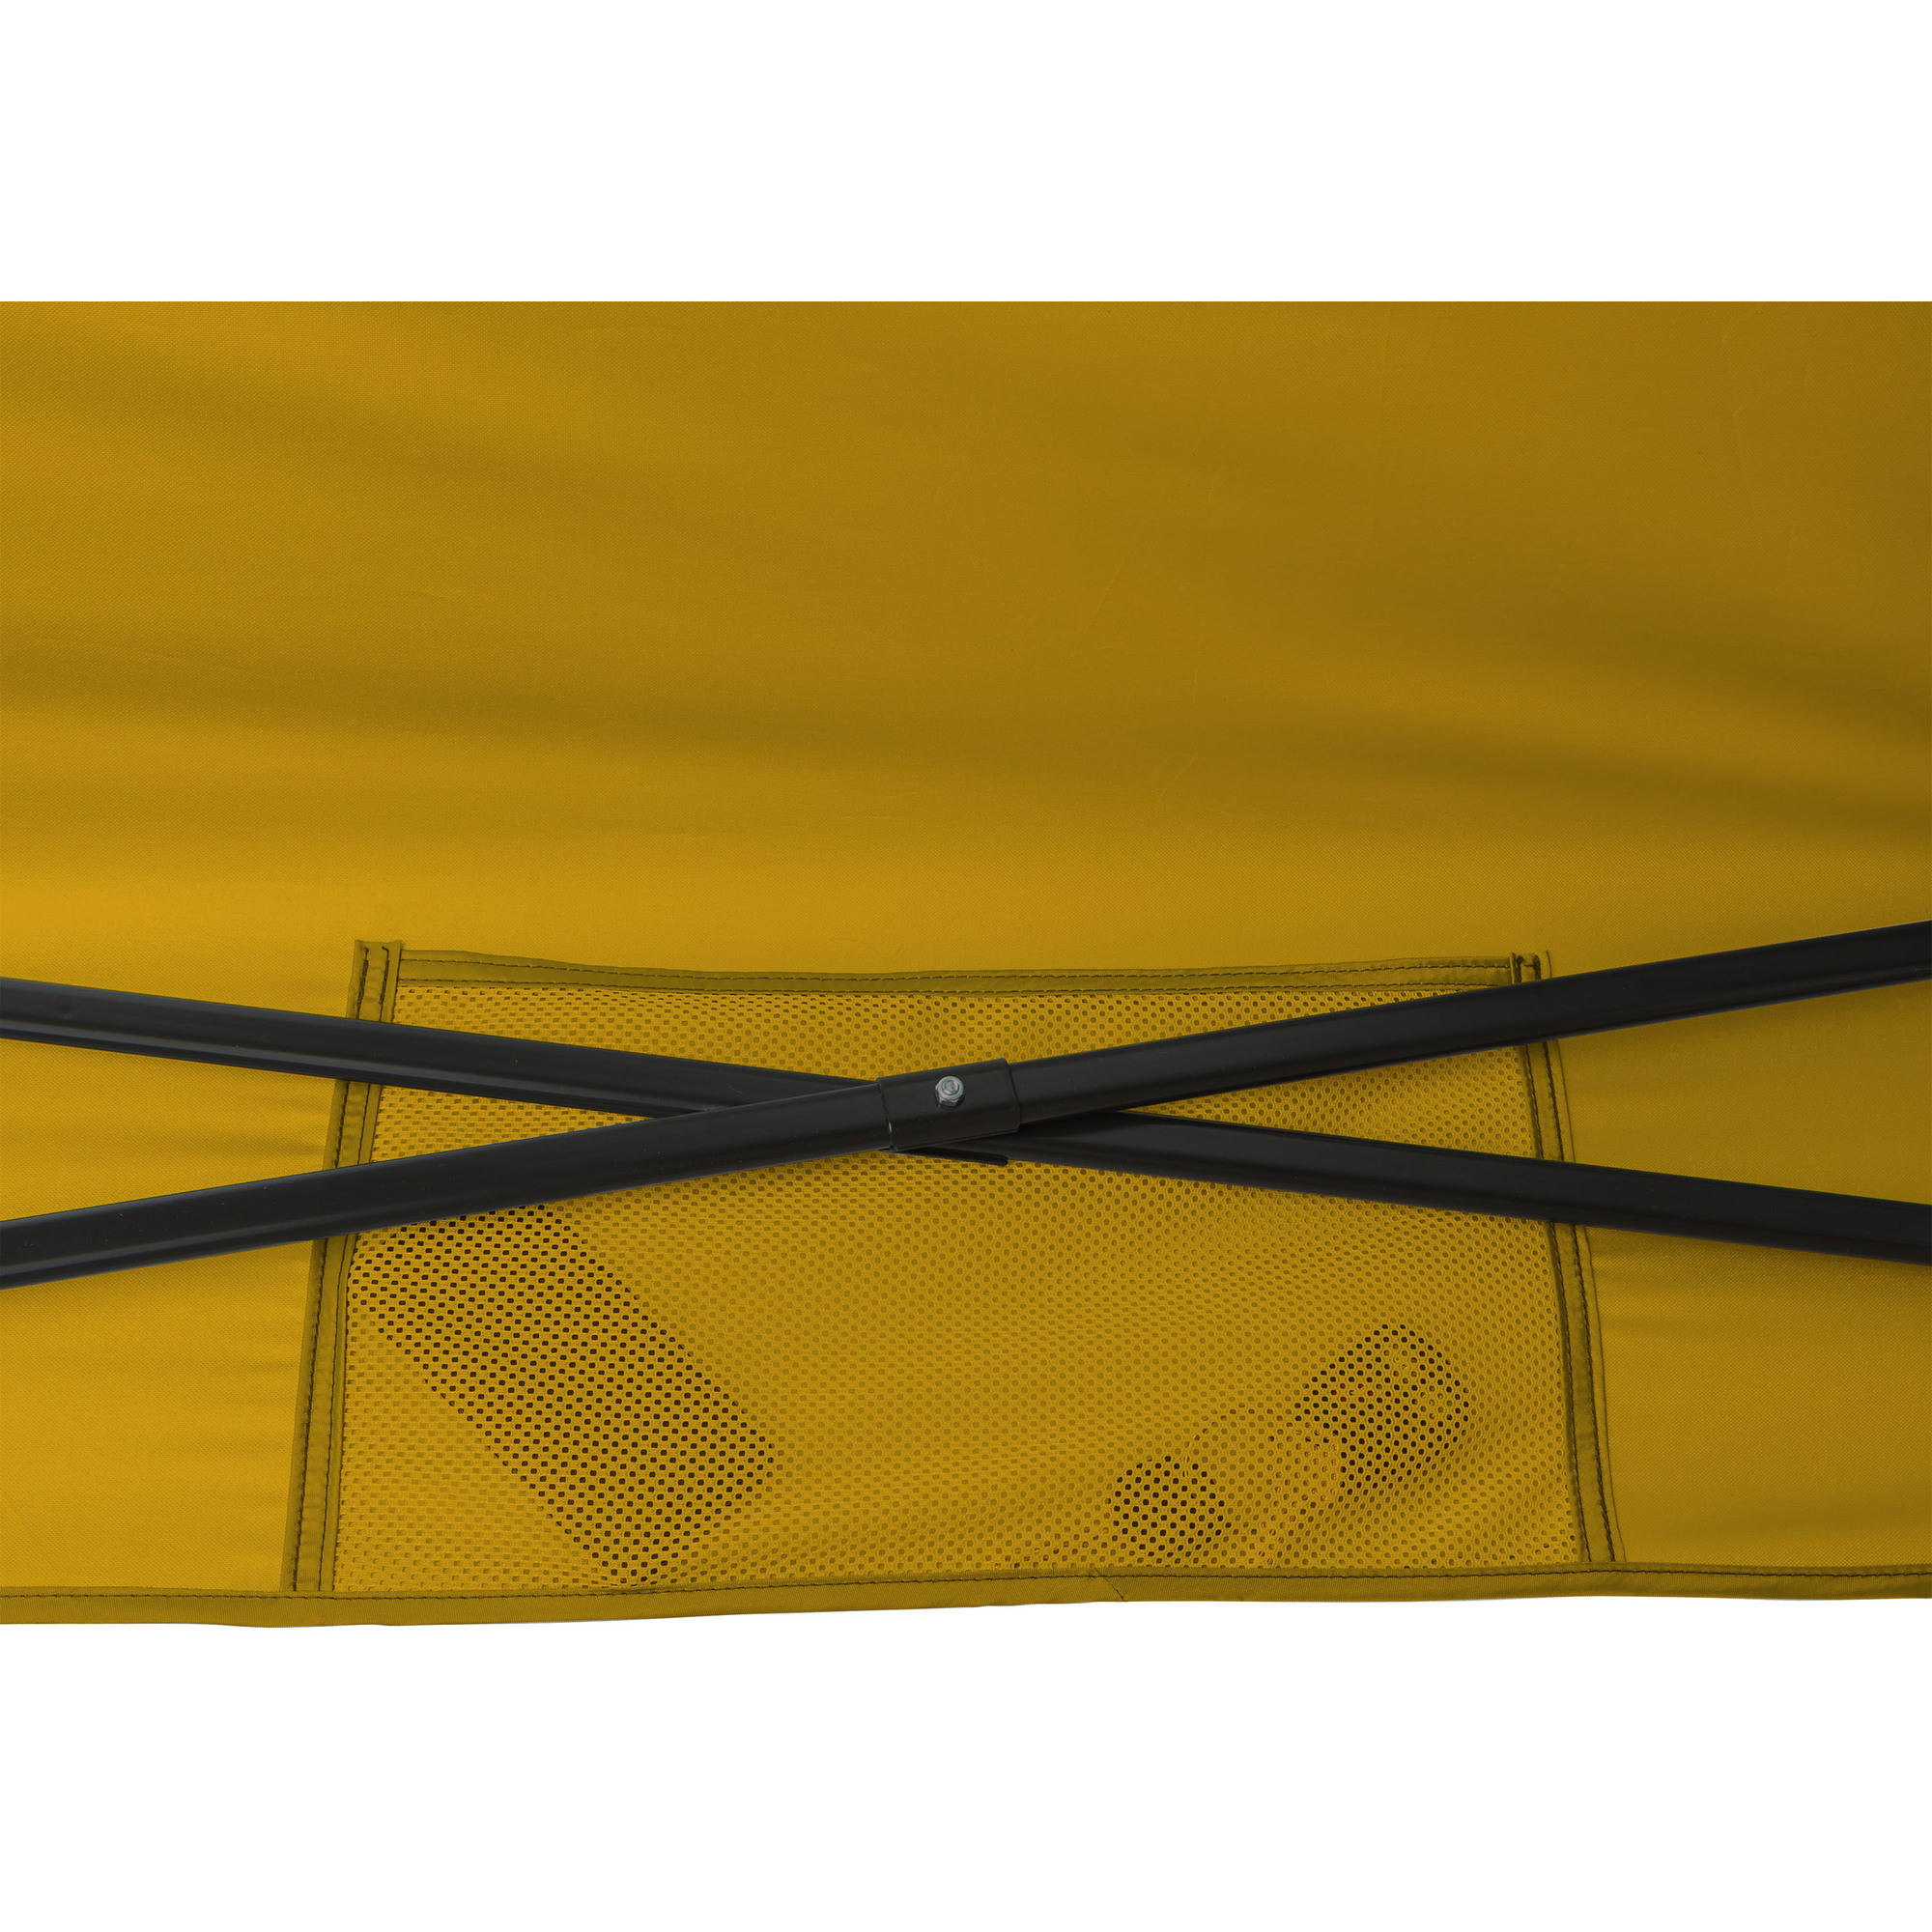 Ozark Trail 10' x 10' Yellow Instant Outdoor Canopy with UV Protection Material - image 3 of 5